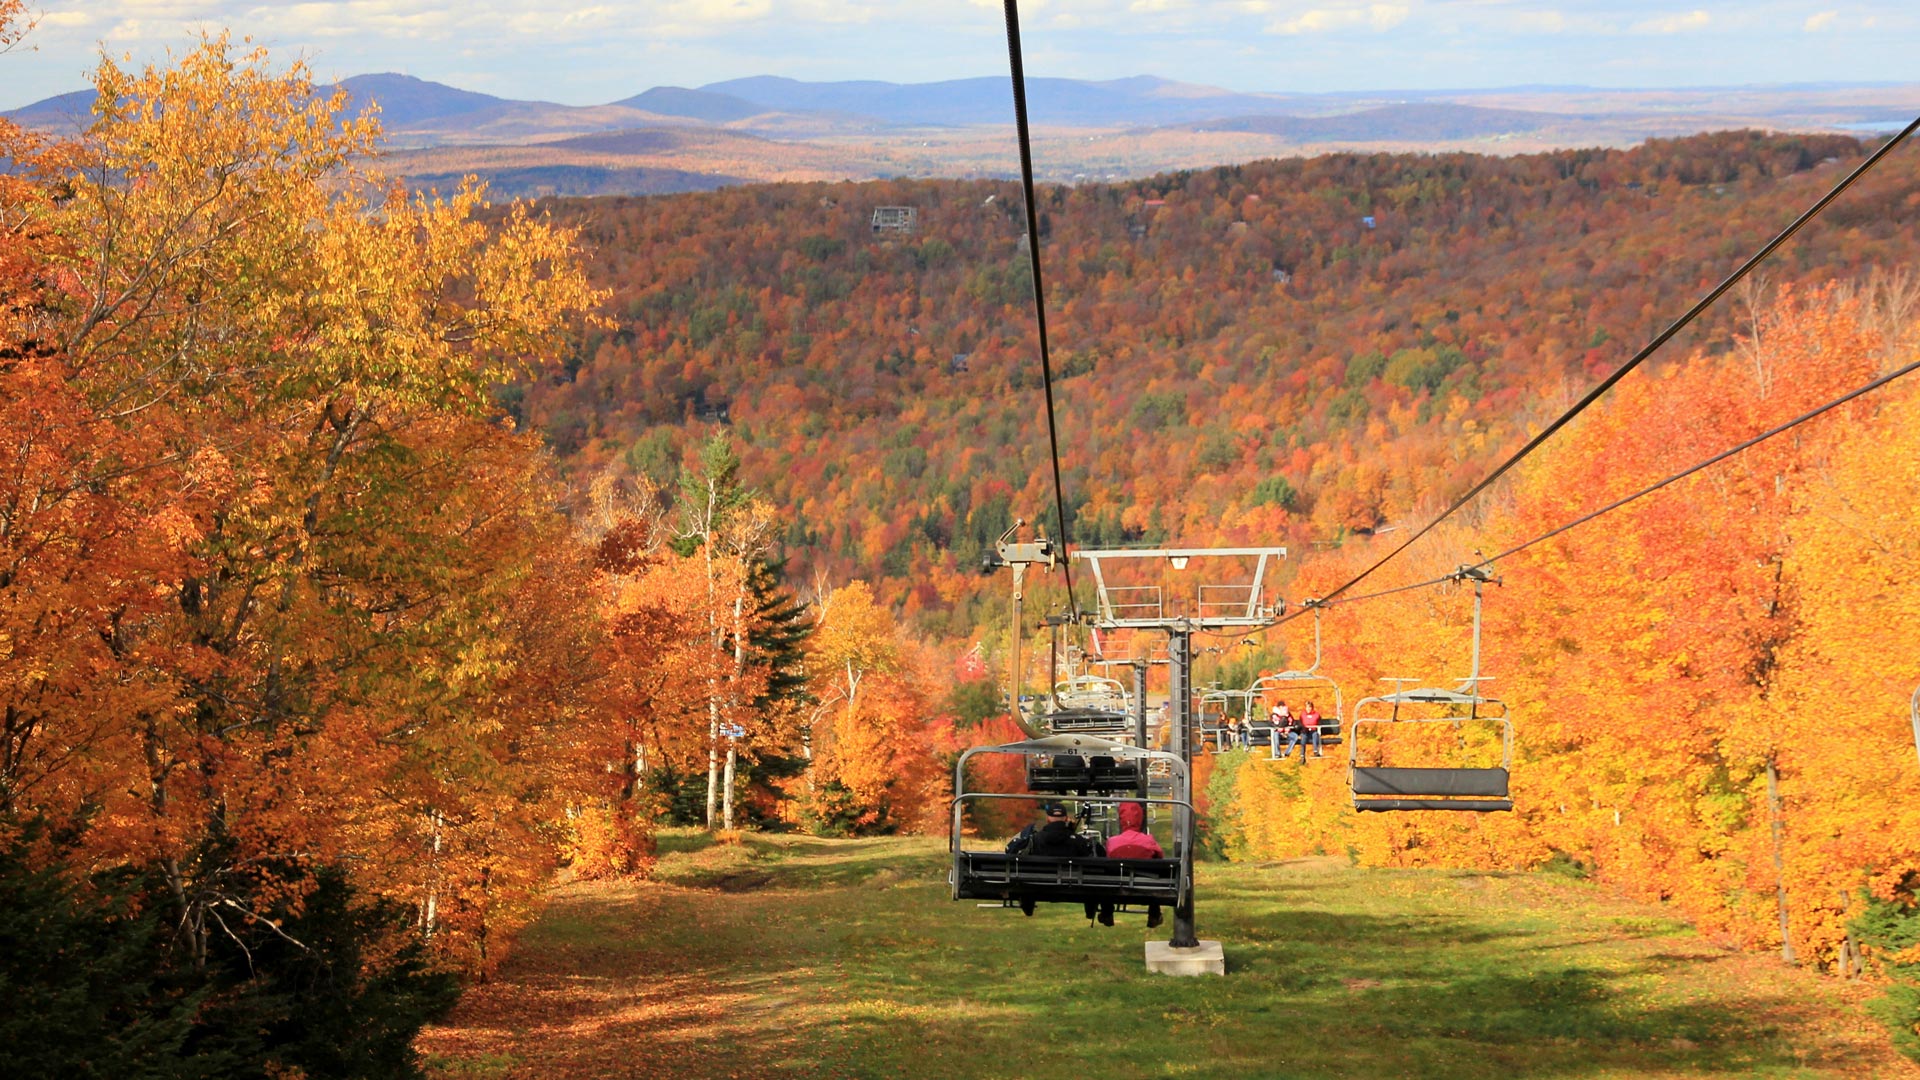 Chairlift ride – Mont SUTTON